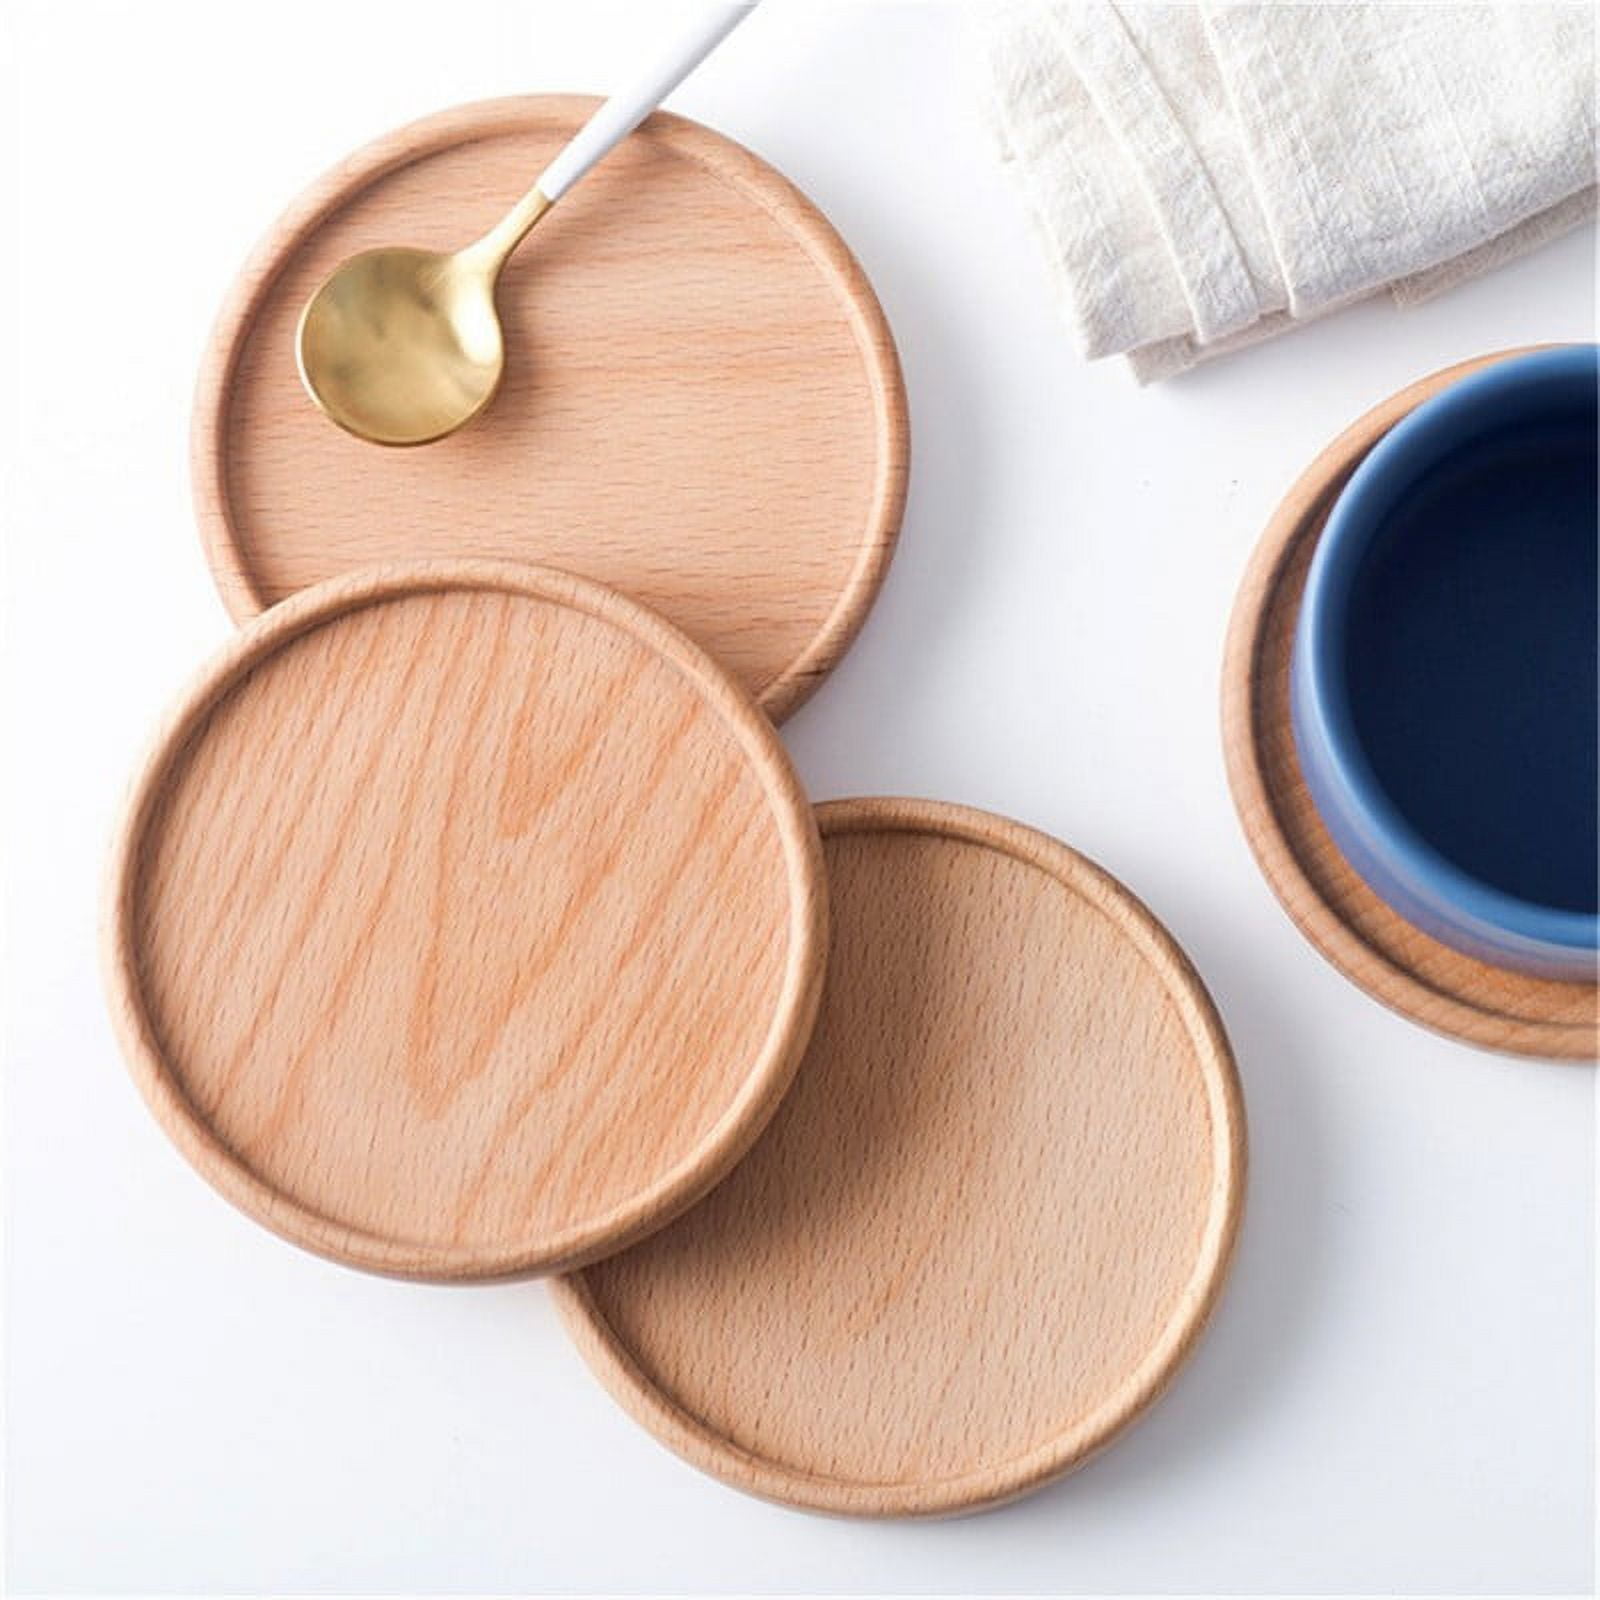 Wooden Coasters for Drinks - Natural Acacia Wood Drink Coaster Set for  Drinking Glasses, Tabletop Protection for Any Table Type 1pc 